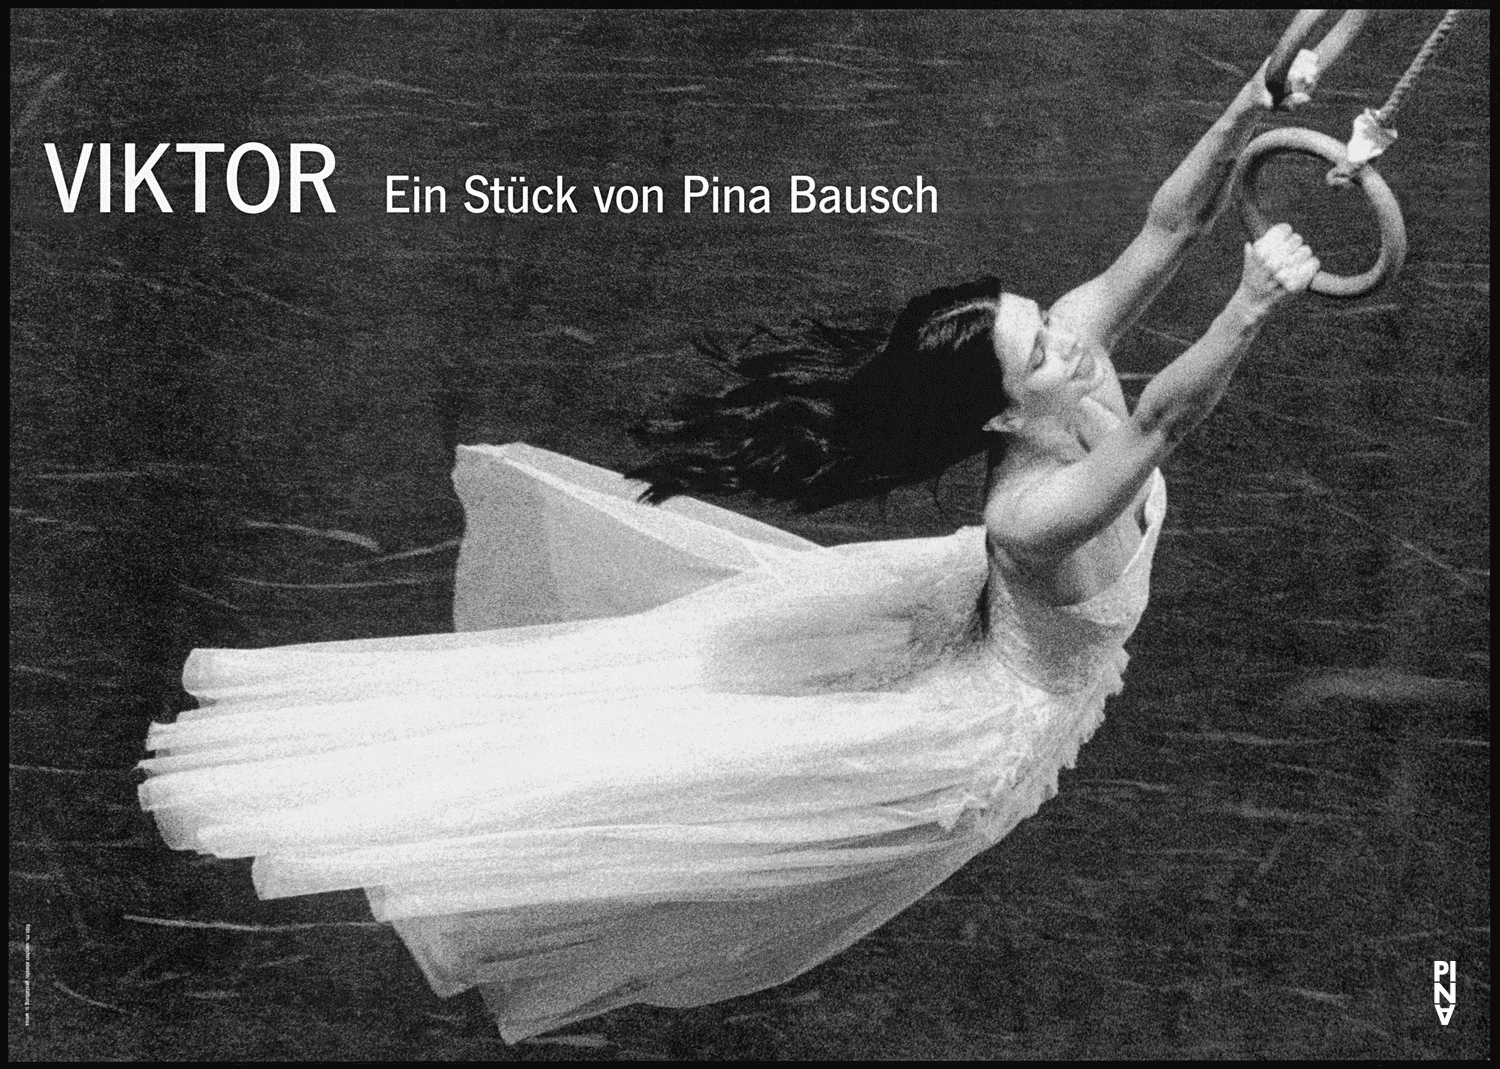 Poster for “Viktor” by Pina Bausch